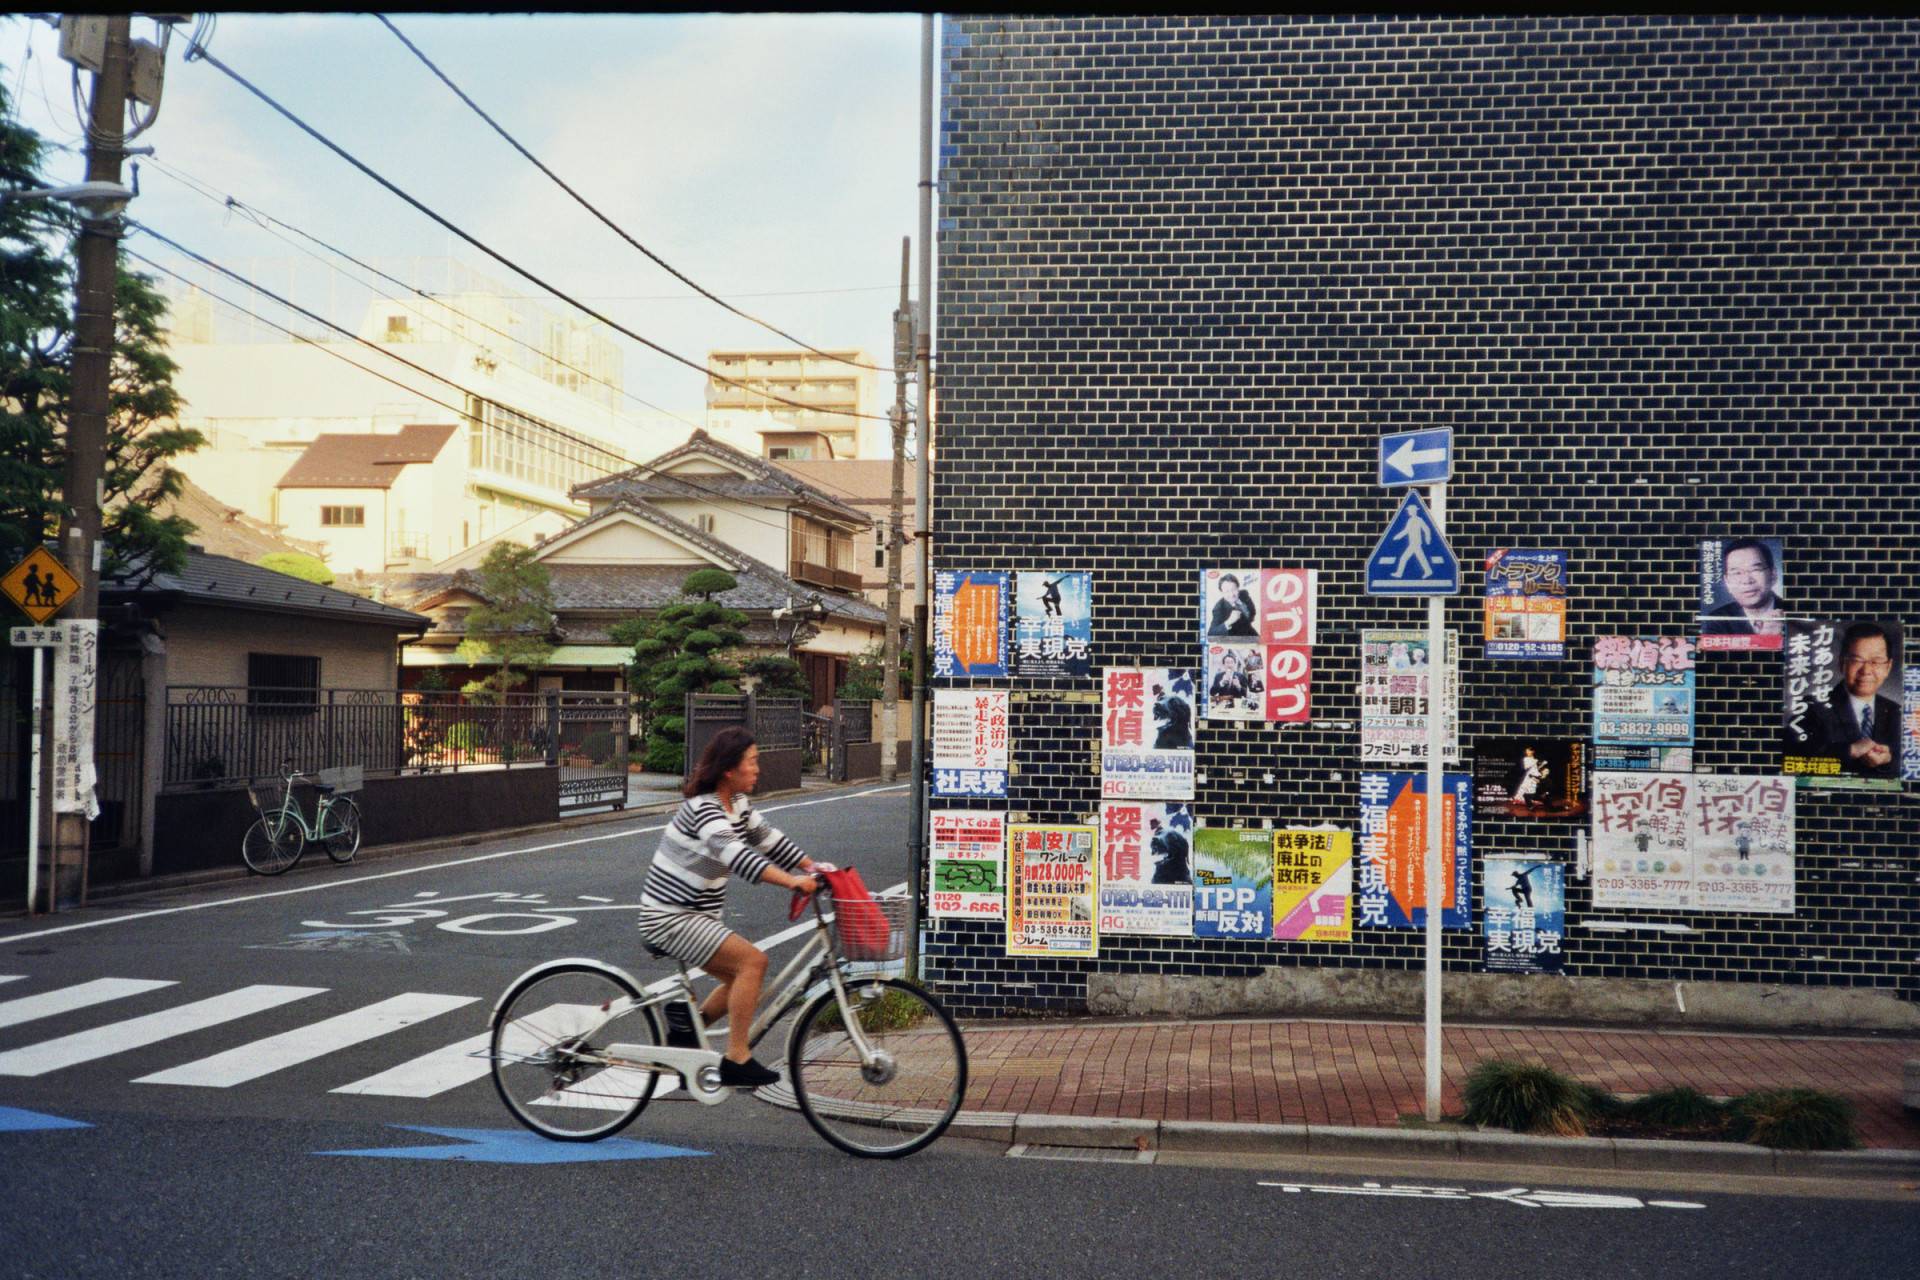 a wall on the right covered with black tiles with posters on it on the corner of a street, a woman riding a bicycle and a temple on the left side down the street